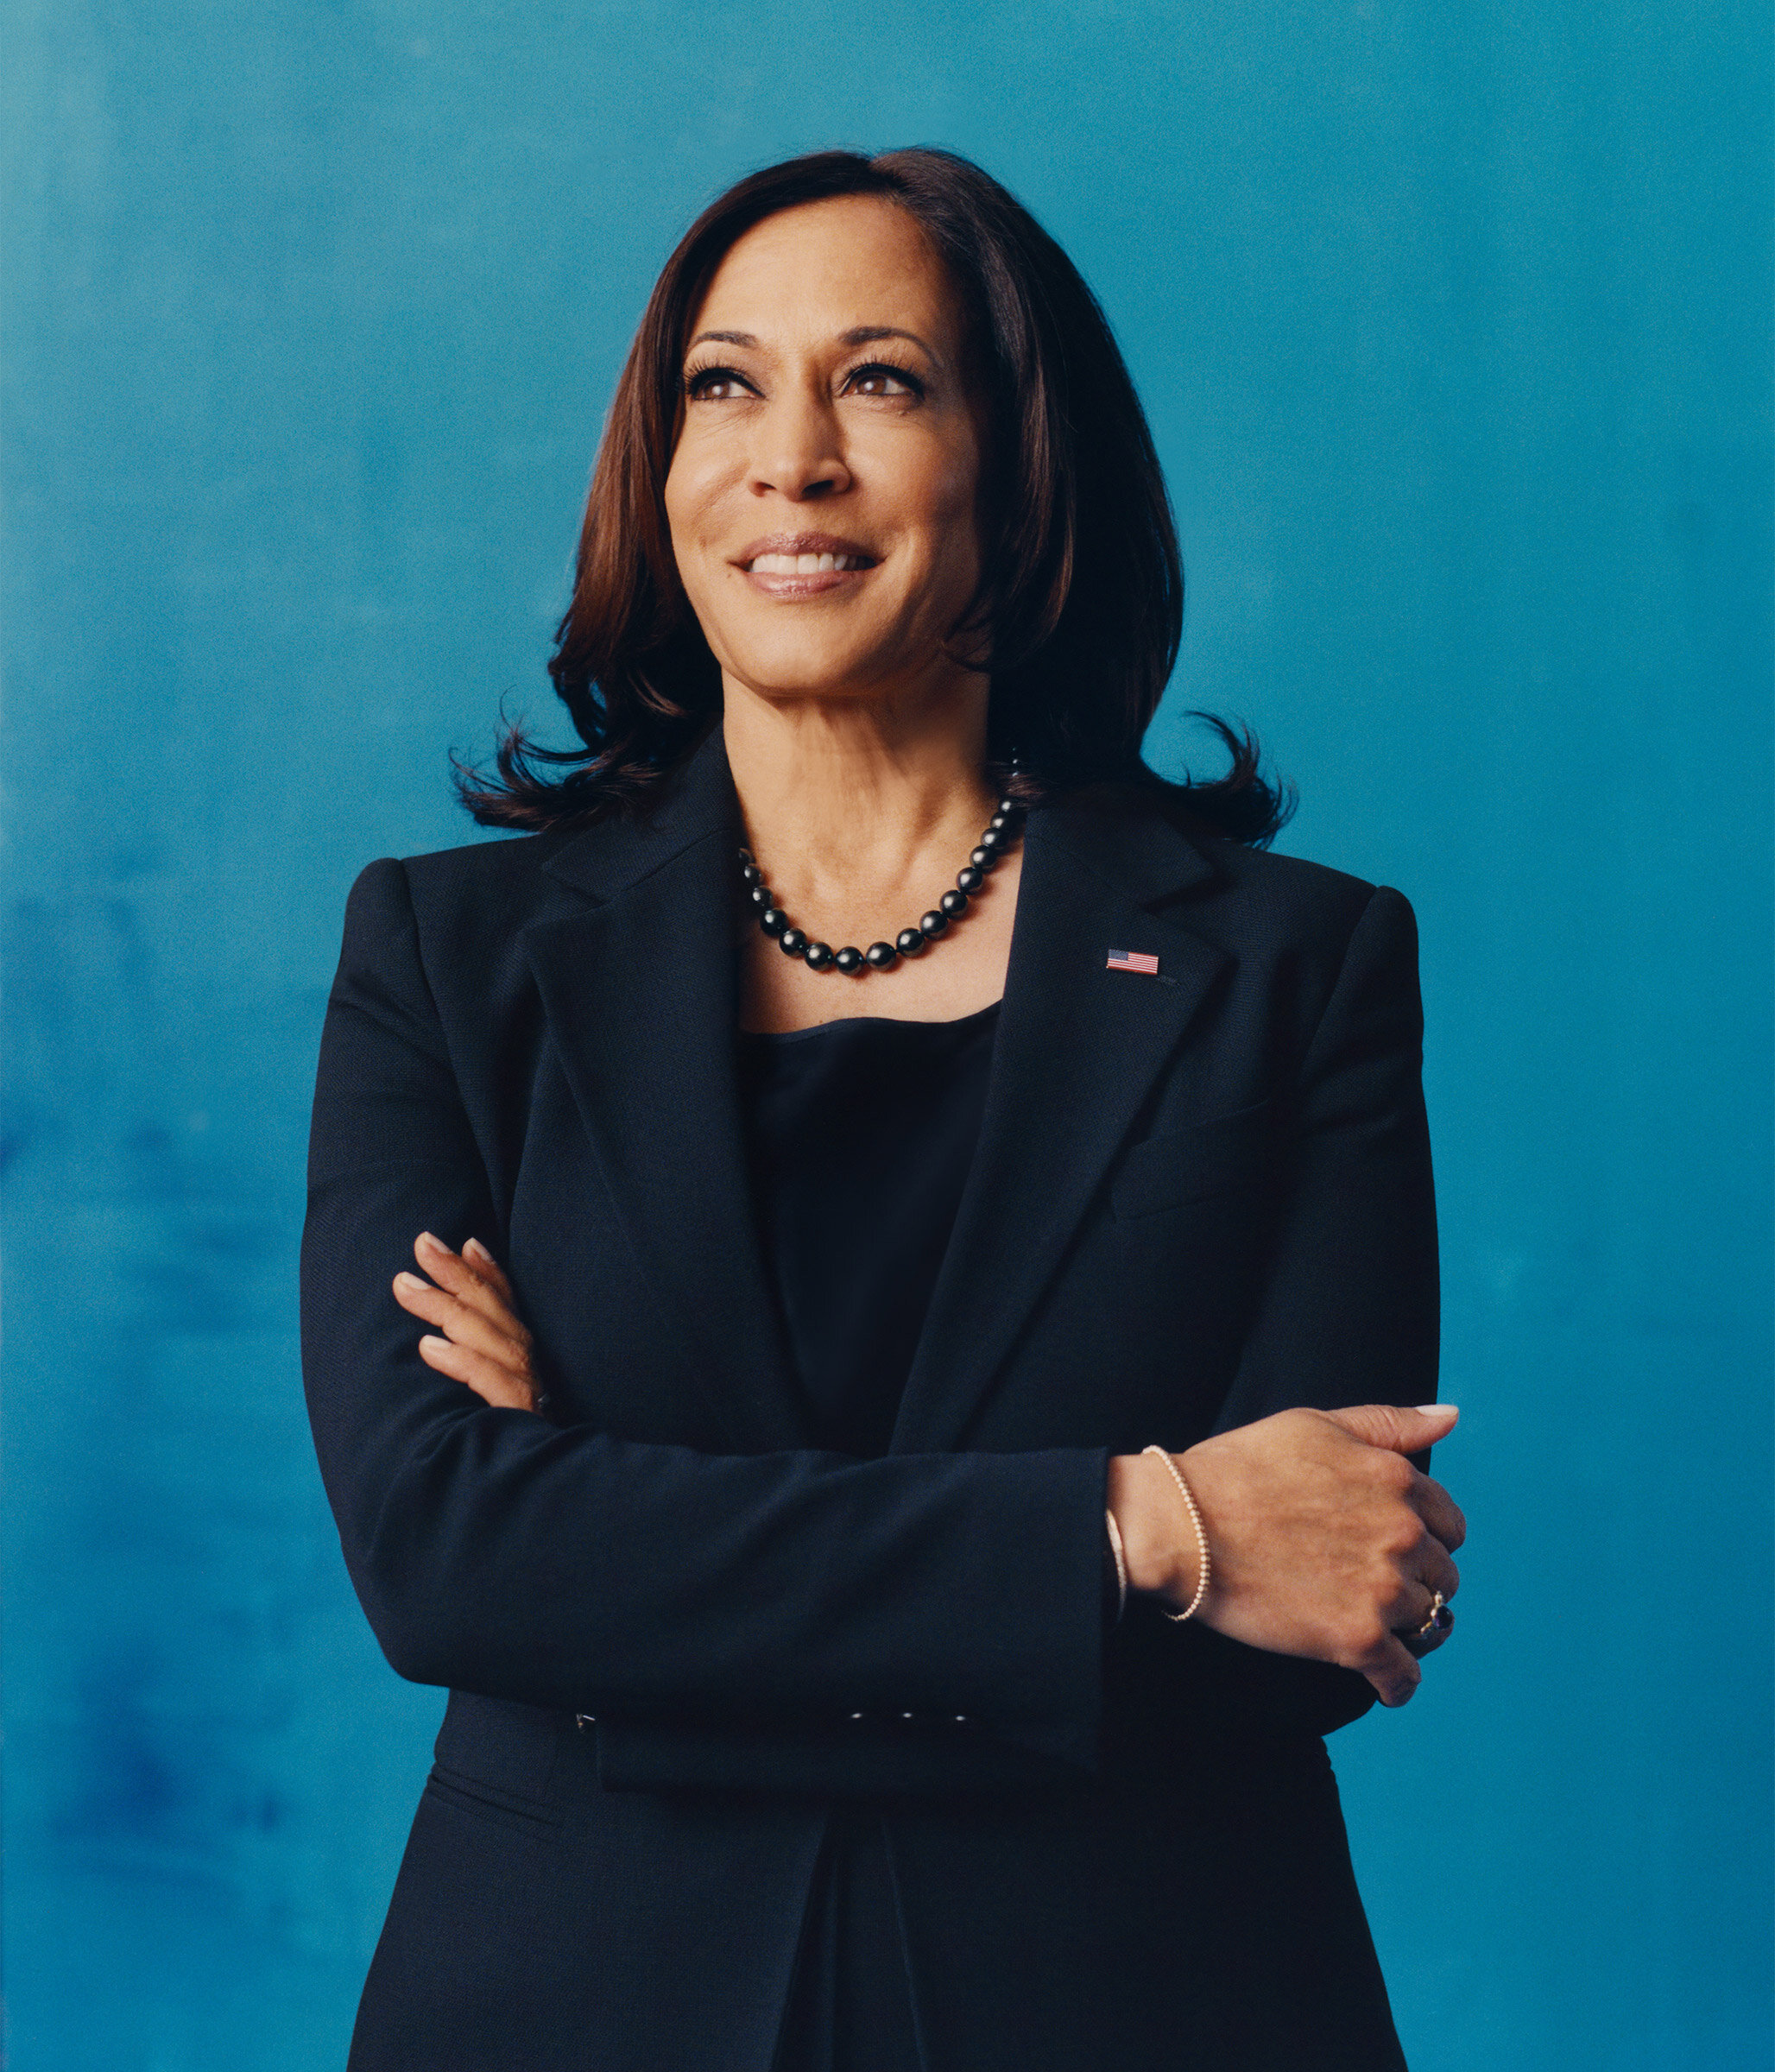 Forbes' 100 Most Powerful Women the women of color making history